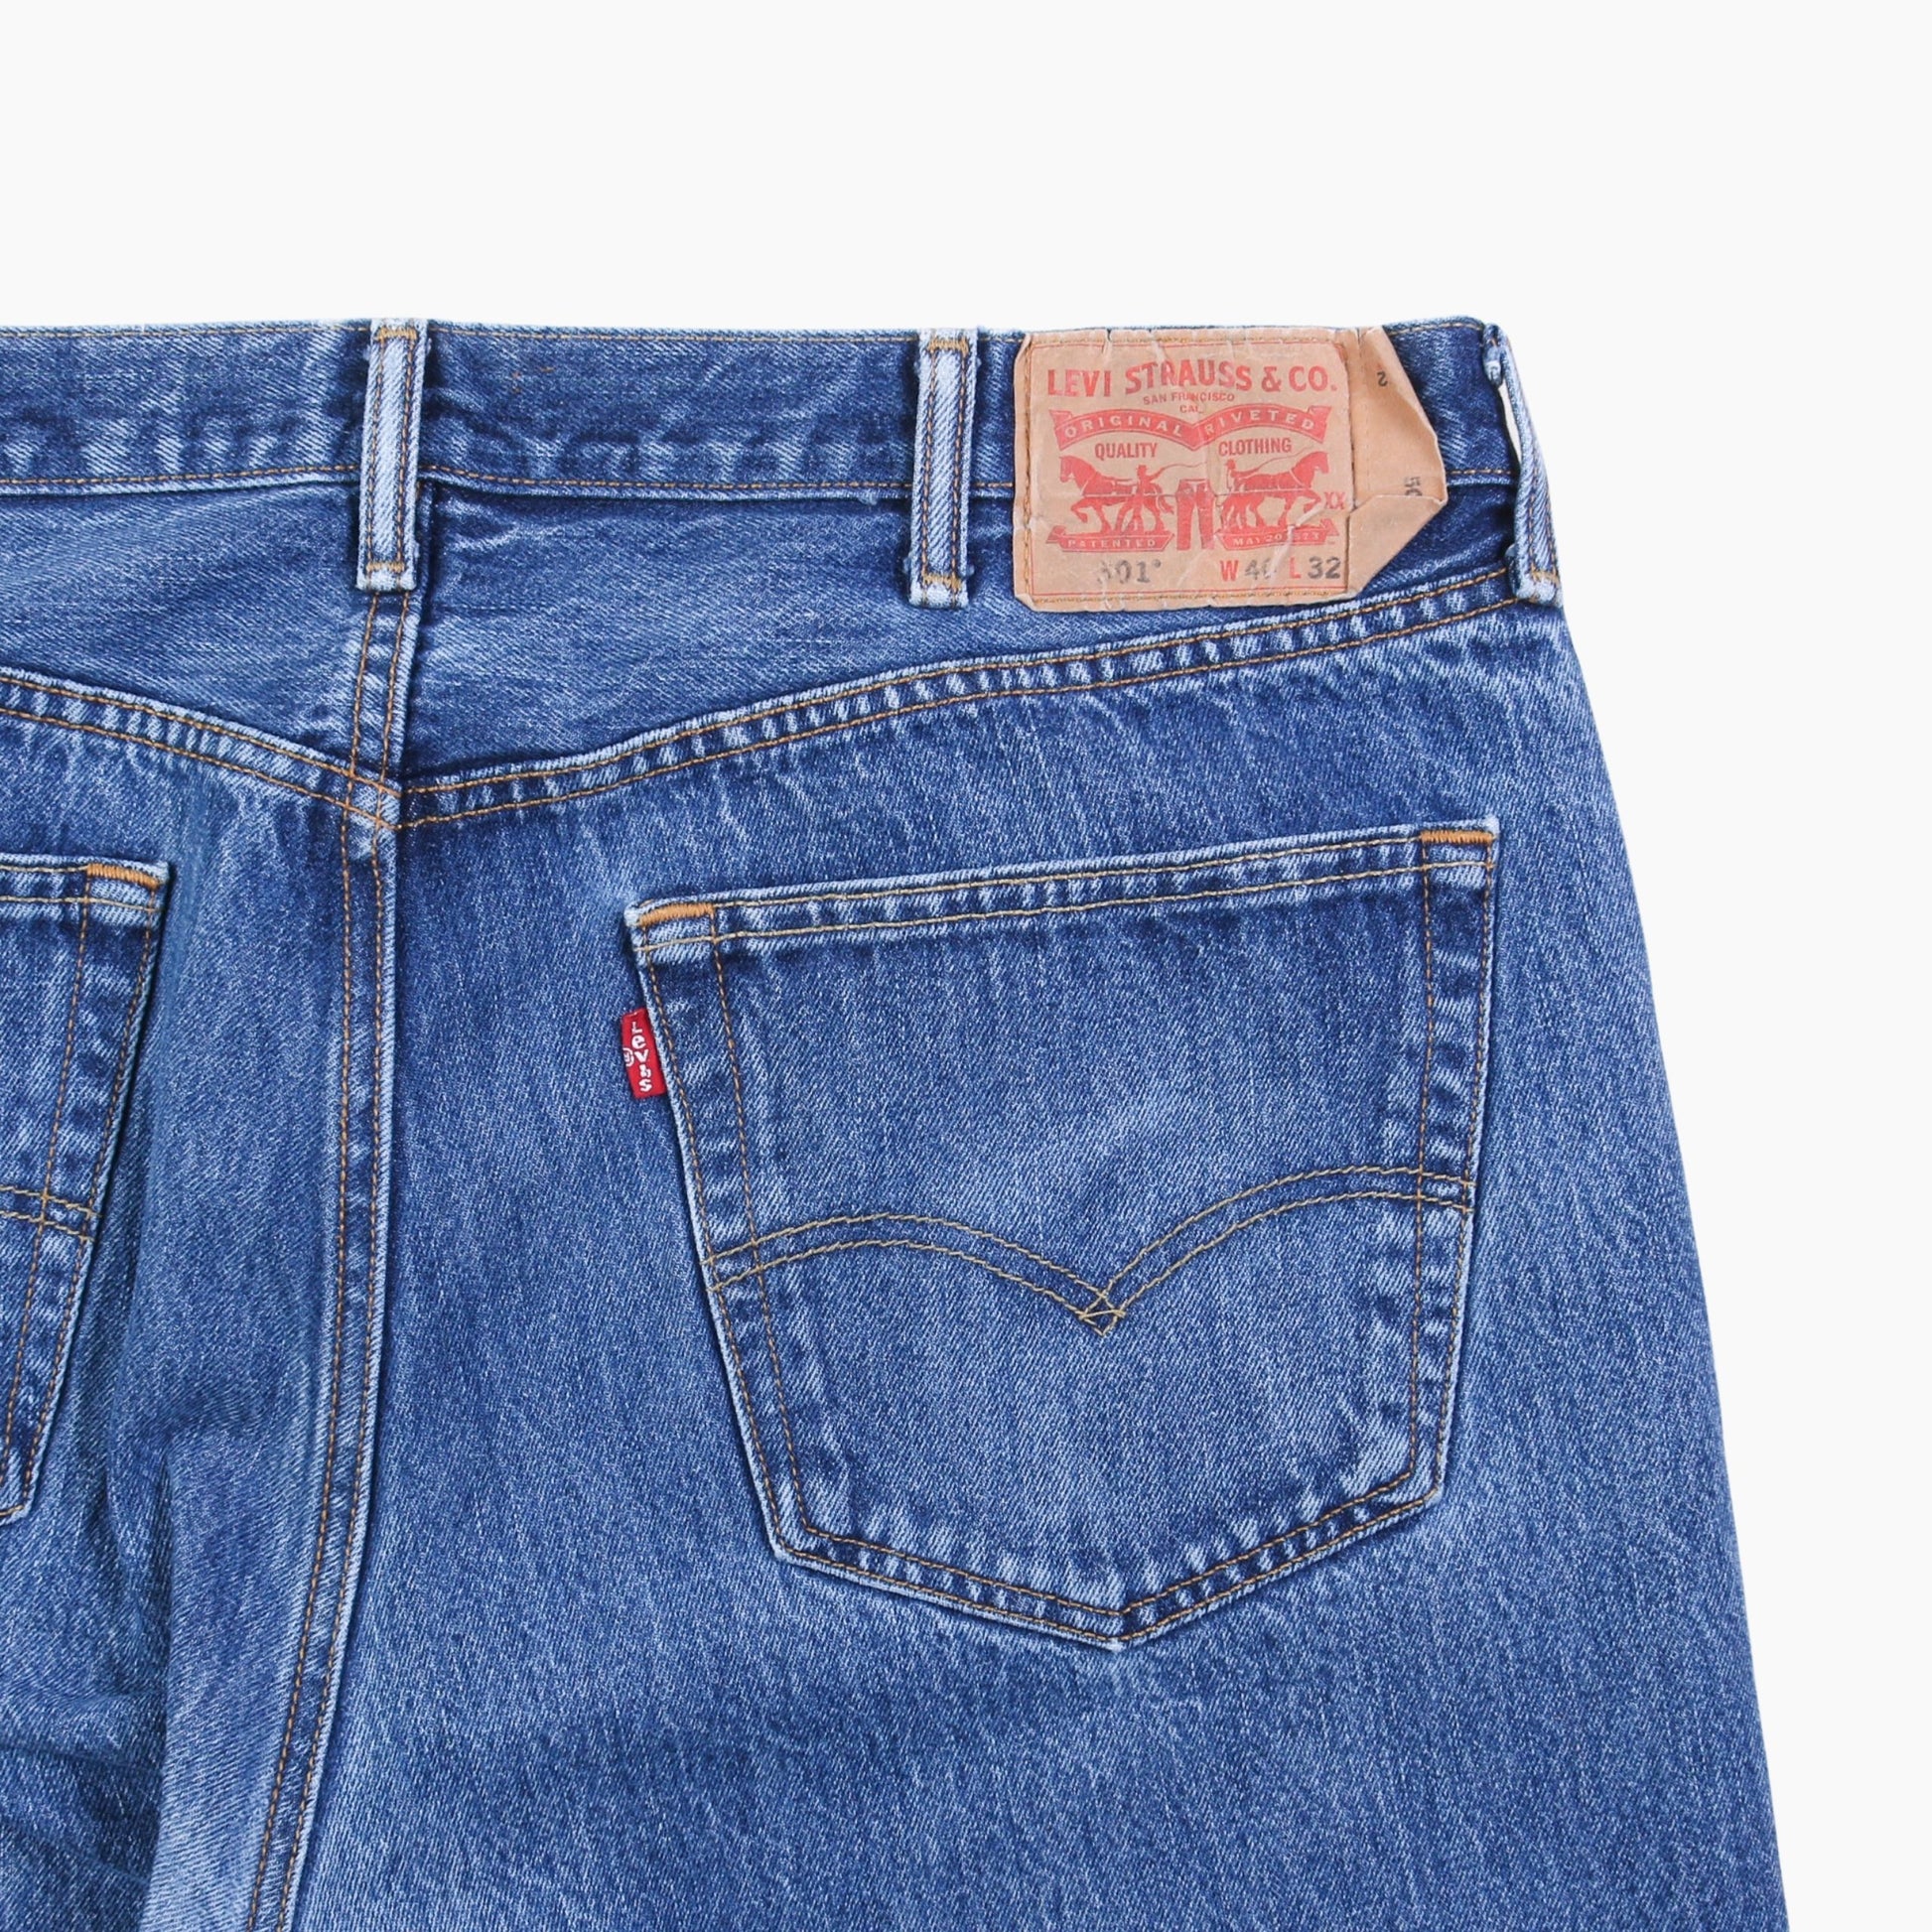 Vintage 501 Jeans - 40" 32" - American Madness